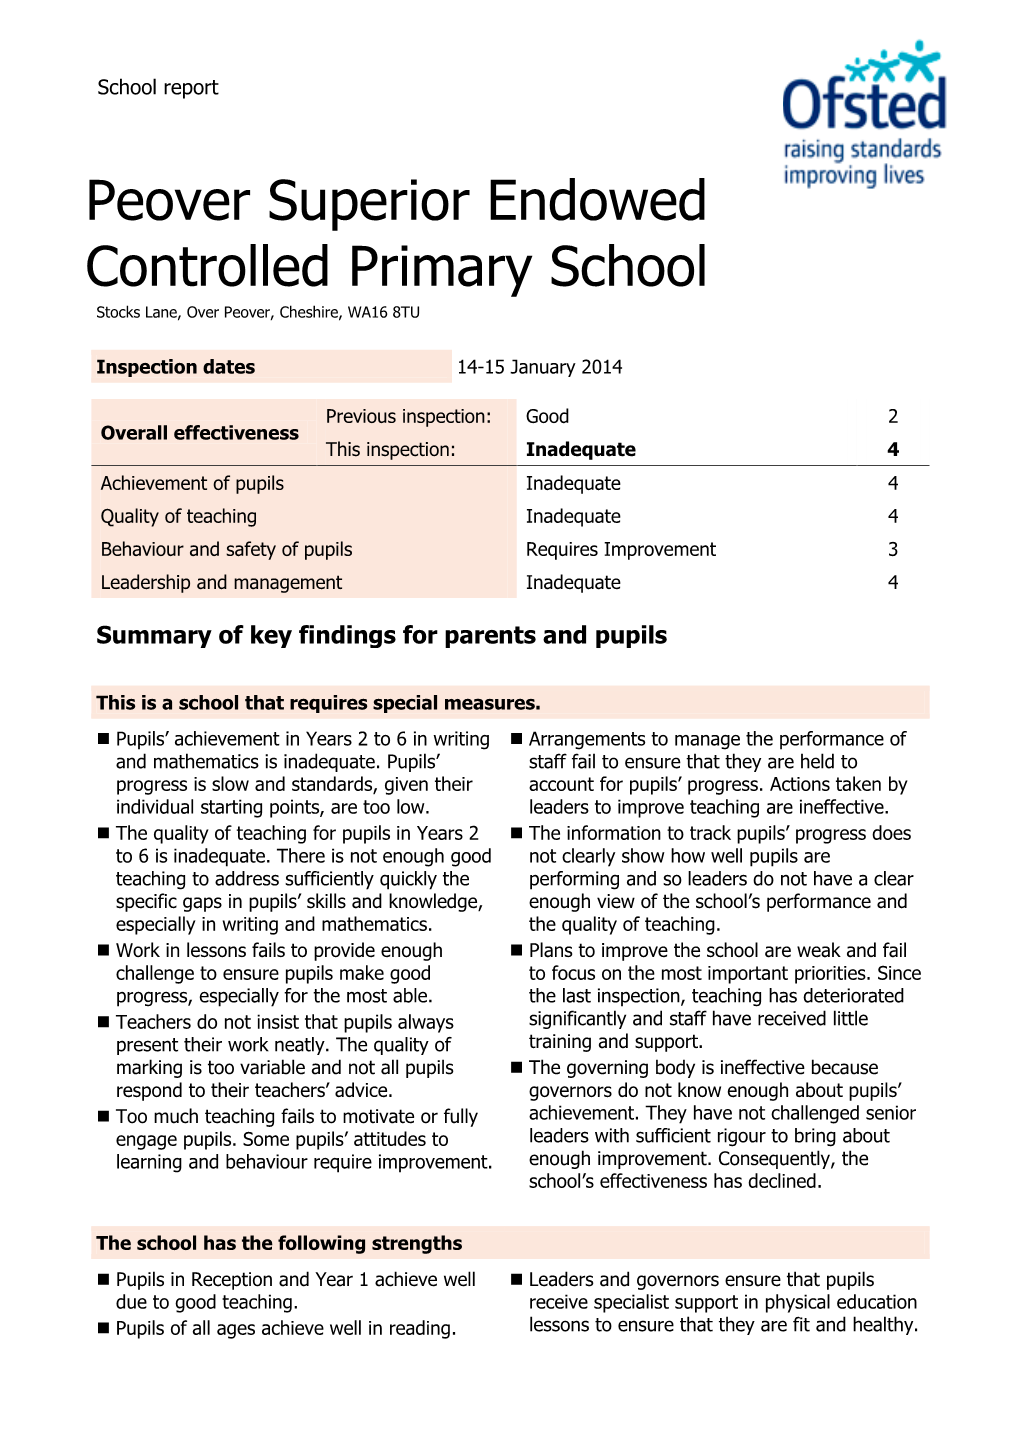 Peover Superior Endowed Controlled Primary School Stocks Lane, Over Peover, Cheshire, WA16 8TU